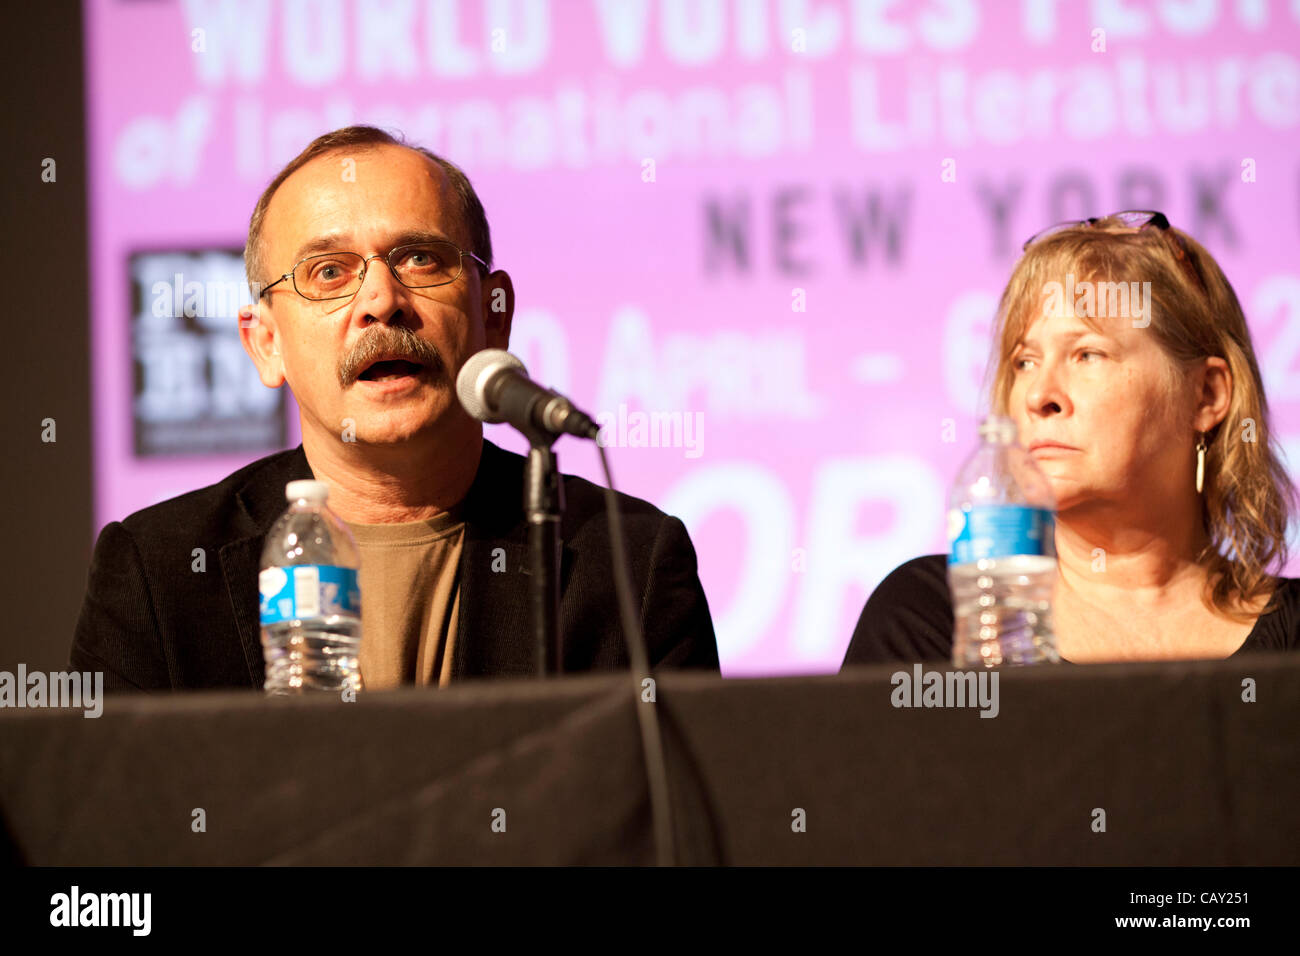 Panel on Children's Rights at Pen World Voices Festival, New York, NY, May 5, 2012, with moderator Susanna Reich (PEN), Polish Journalist Wojciech Jagielski (L), authors Debby Dahl Edwardson (R) and Patricia McCormack, and former child soldier Arn Chorn-Pond Stock Photo